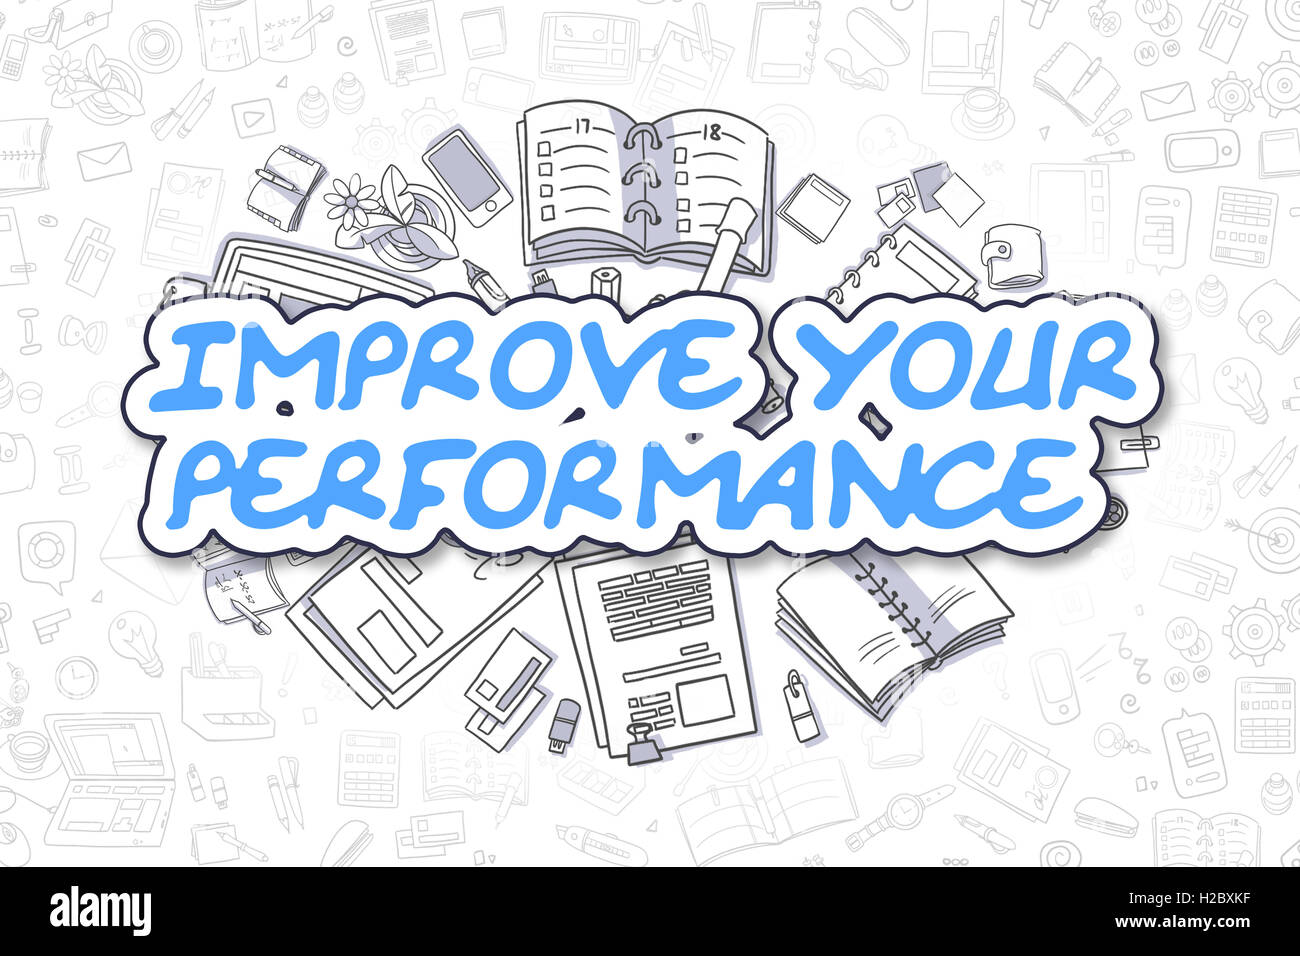 Improve Your Performance - Business Concept. Stock Photo